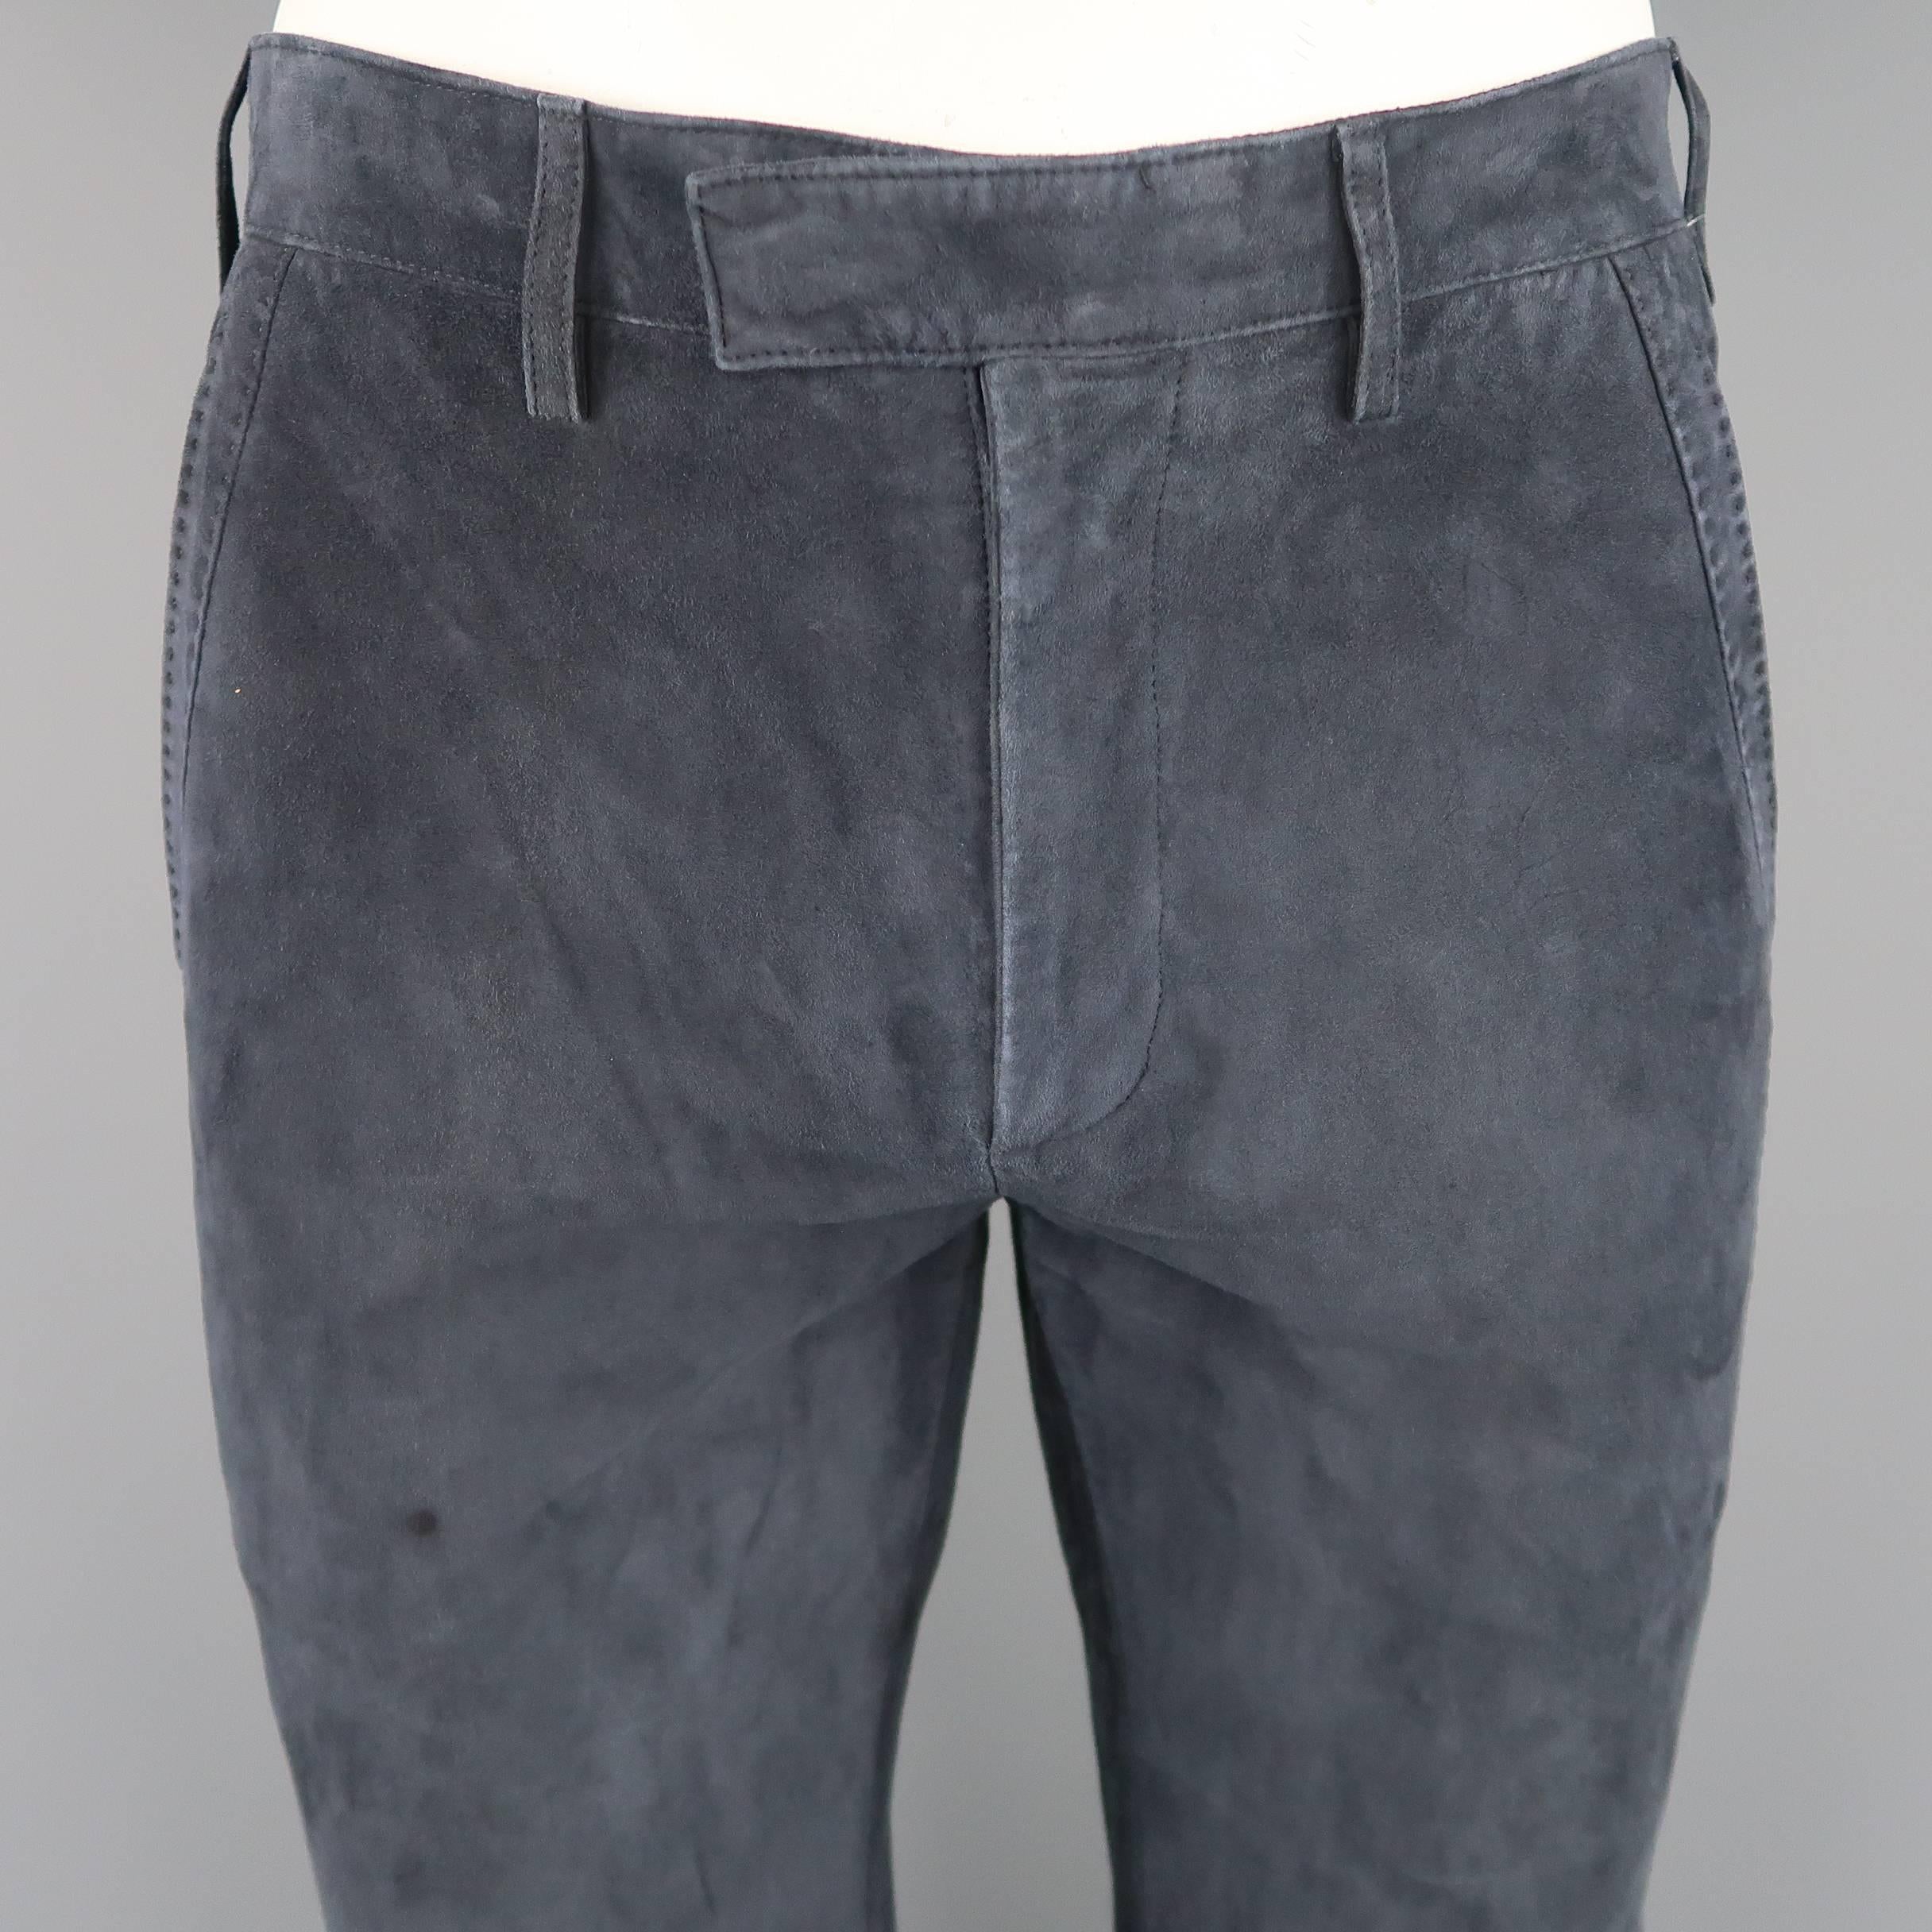 JOHN VARVATOS pants come in muted navy blue suede with a hidden closure tab waistband, zip fly, and top stitch piping throughout. Spot on front and minor wear. Made in Italy.
 
Good Pre-Owned Condition.
Marked: IT 48
 
Measurements:
 
Waist: 32